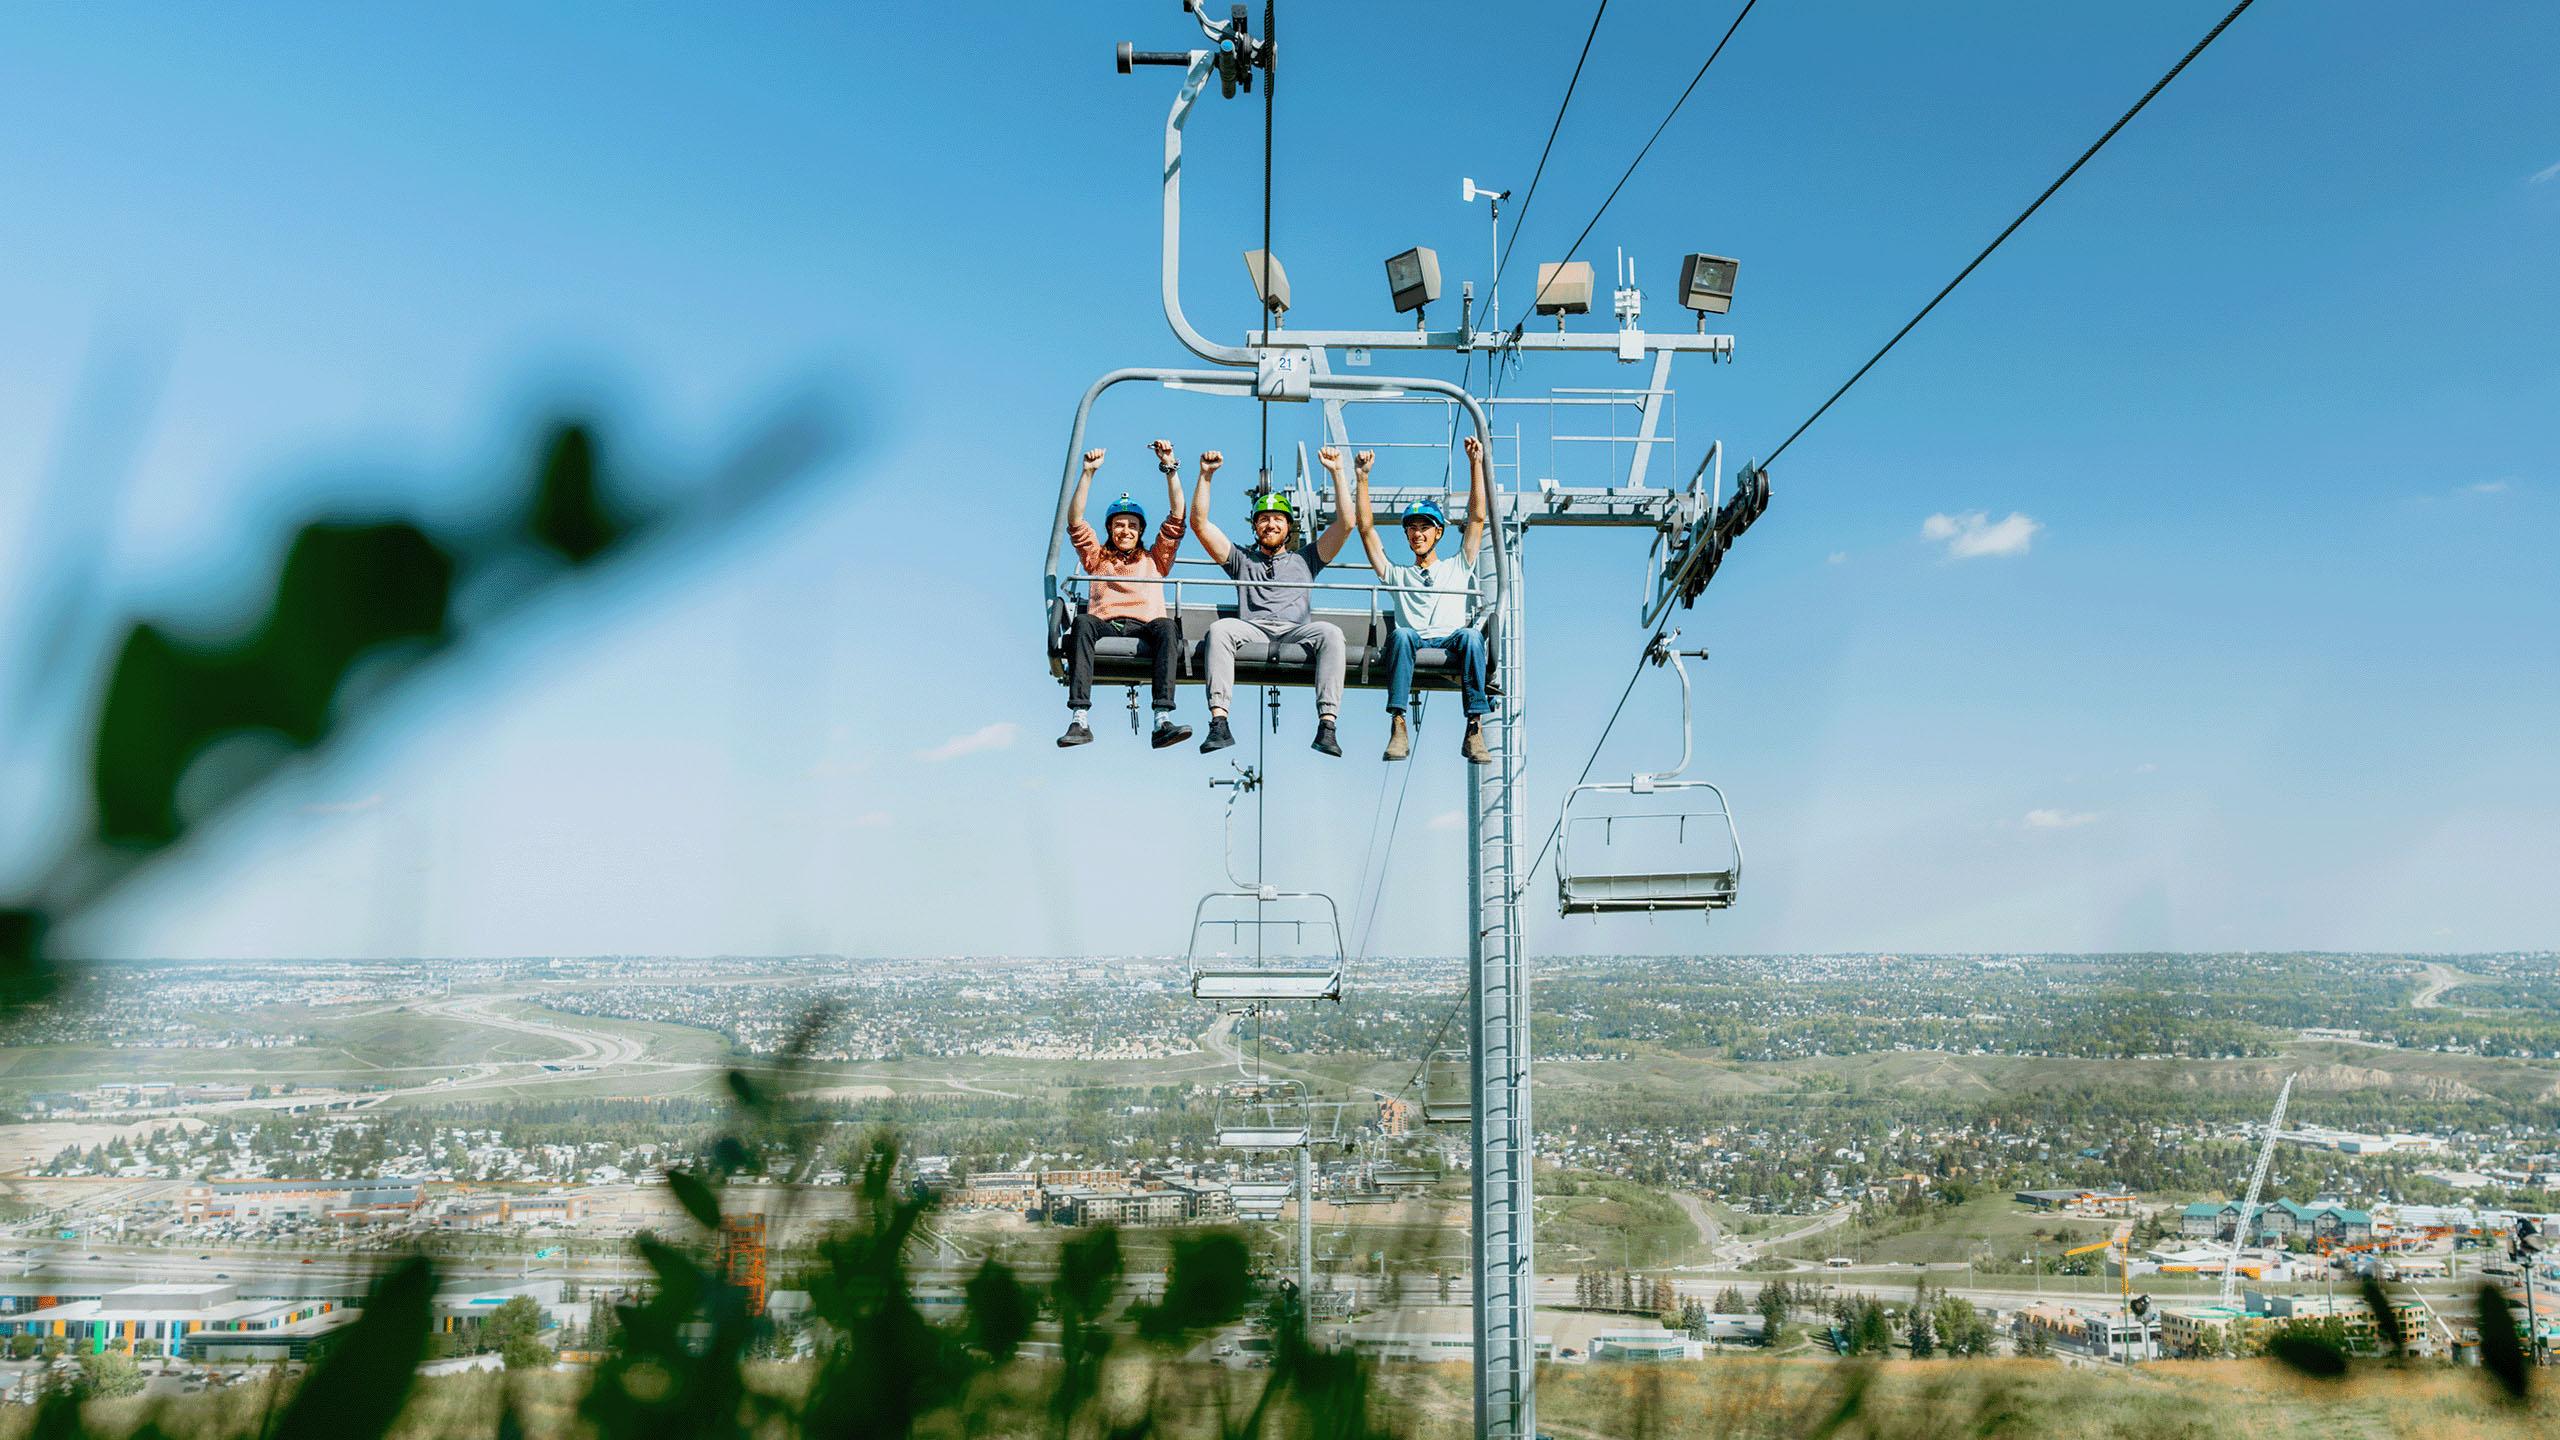 Three friends raise their arms in the air whilst riding the chairlift at Downhill Karting Calgary.